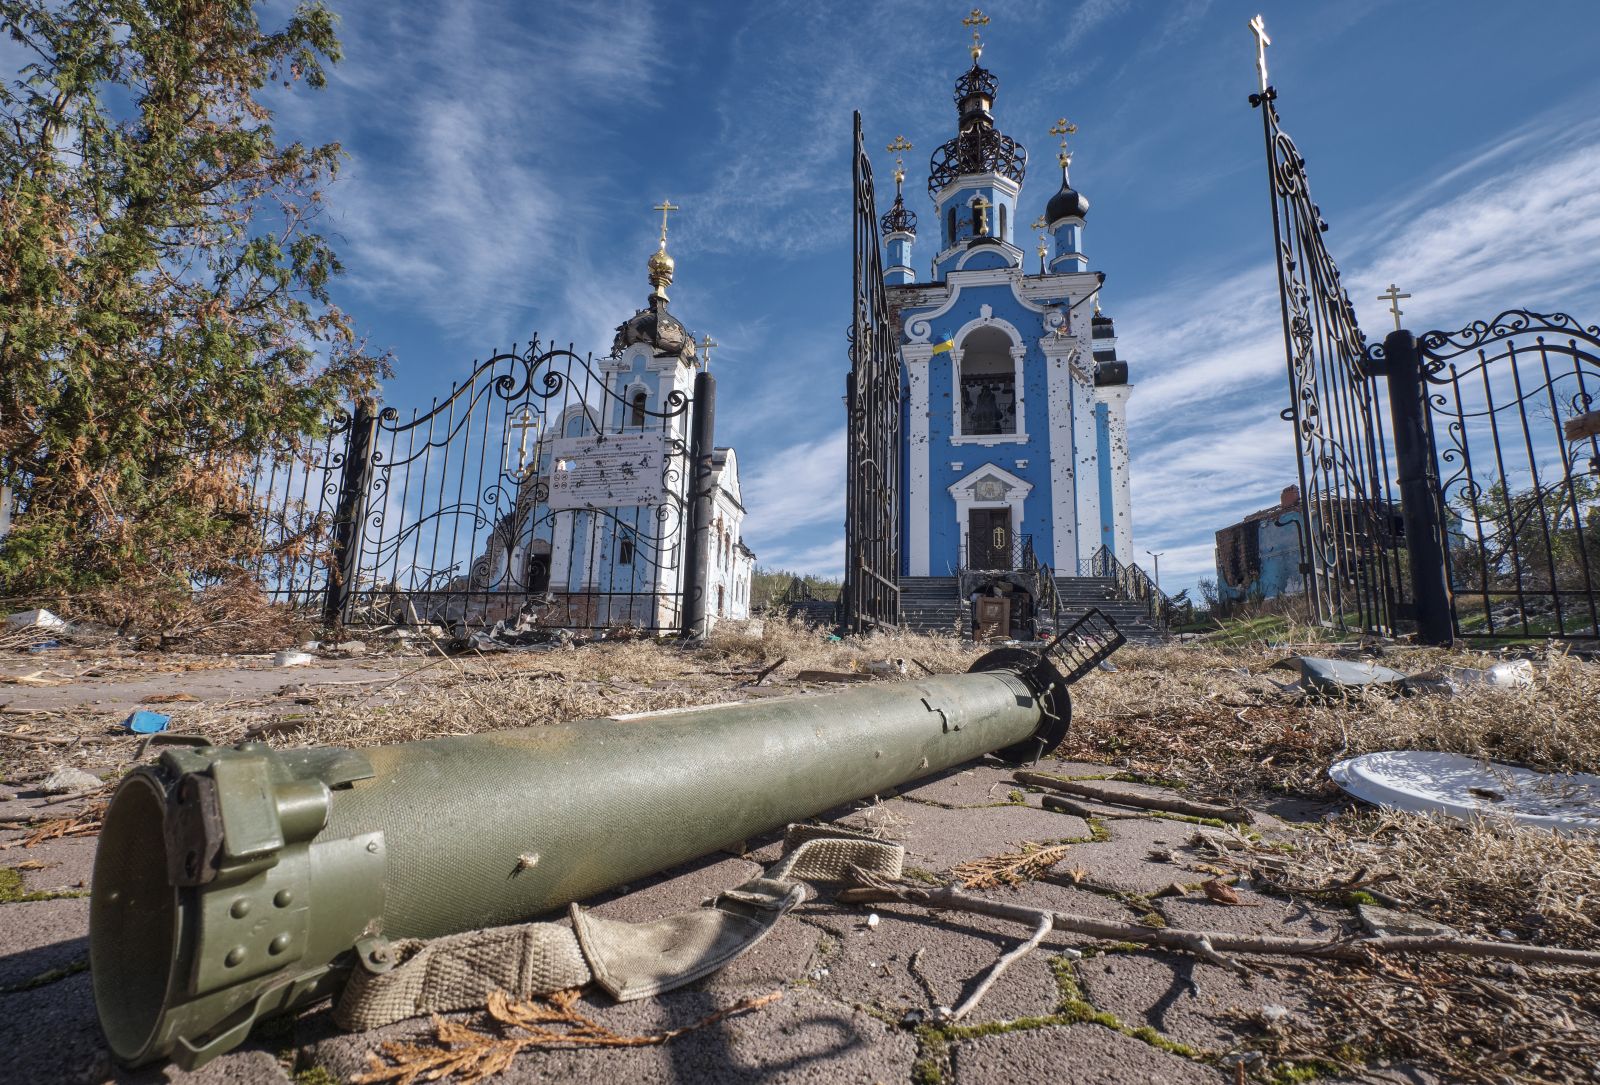 epa10252848 A part of military ammunition lies in front of the destroyed church, which is part of Sviatohirsk Lavra, in the Bohorodychne village of Donetsk area, Ukraine, 19 October 2022 amid the Russian invasion. Bohorodychne village was captured by Russian troops in the summer of 2022 during their offensive on Sviatohirsk and was liberated by the Ukrainian army in September 2022. All buildings of the village were destroyed and from almost 800 inhabitants before the war, just two people stay to live there now. The Ukrainian army pushed Russian troops from occupied territory in the northeast of the country in a counterattack. Russian troops entered Ukraine on 24 February 2022 starting a conflict that has provoked destruction and a humanitarian crisis.  EPA/YEVGEN HONCHARENKO